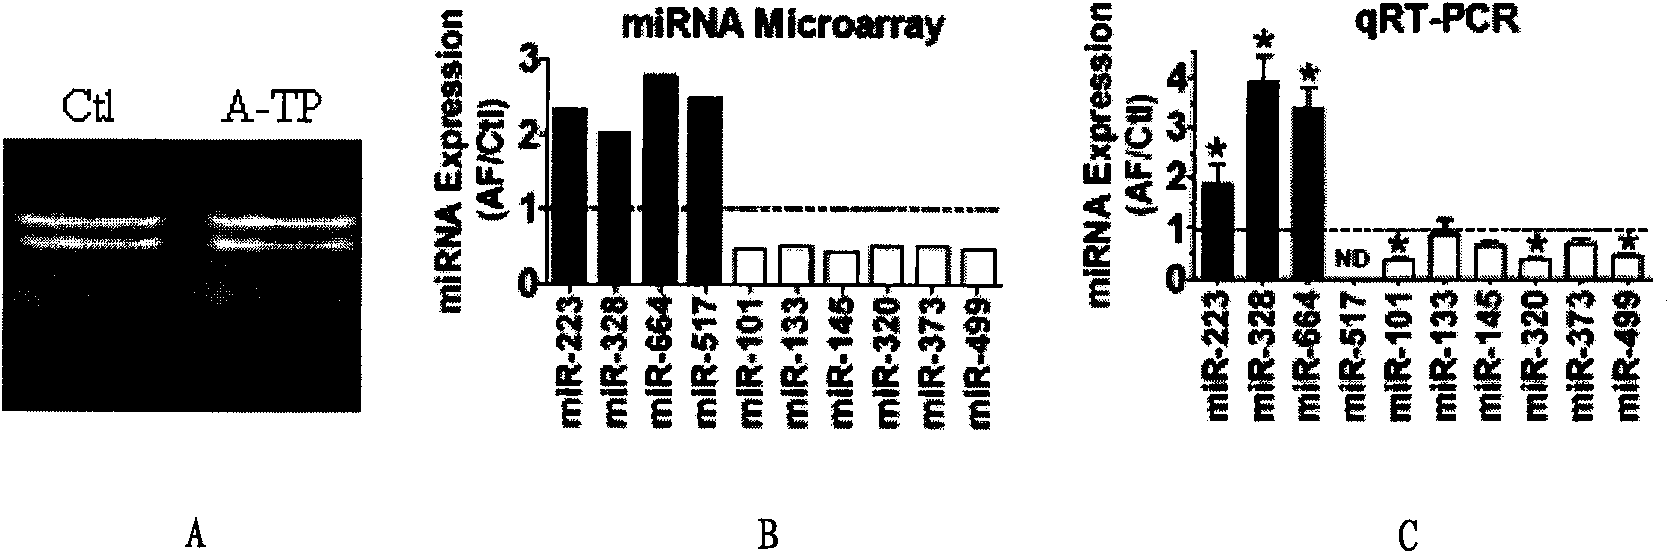 MicroRNA-328 and application of antisense nucleotide thereof for diagnosing, preventing and curing heart diseases